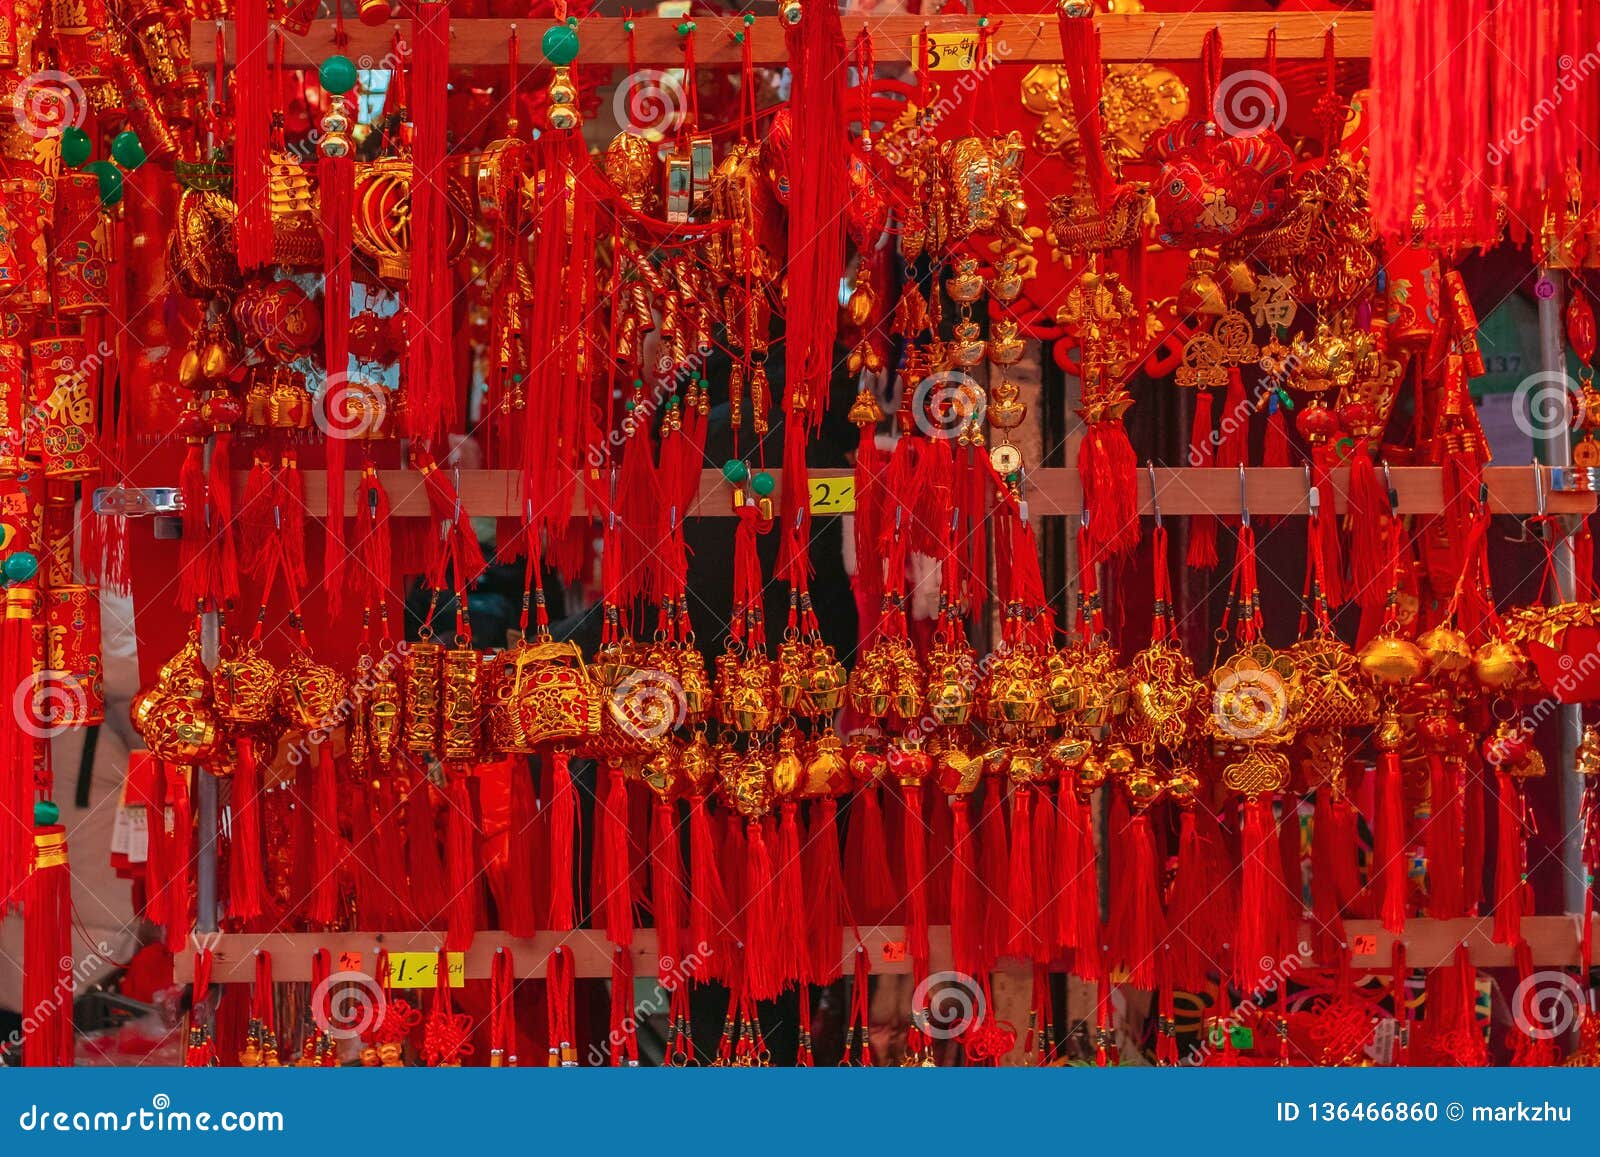 A Store In Chinatown Selling Chinese New Year Decorations As The Chinese Lunar New Year The Year Of The Pig Is Approaching Editorial Image Image Of York Chinese